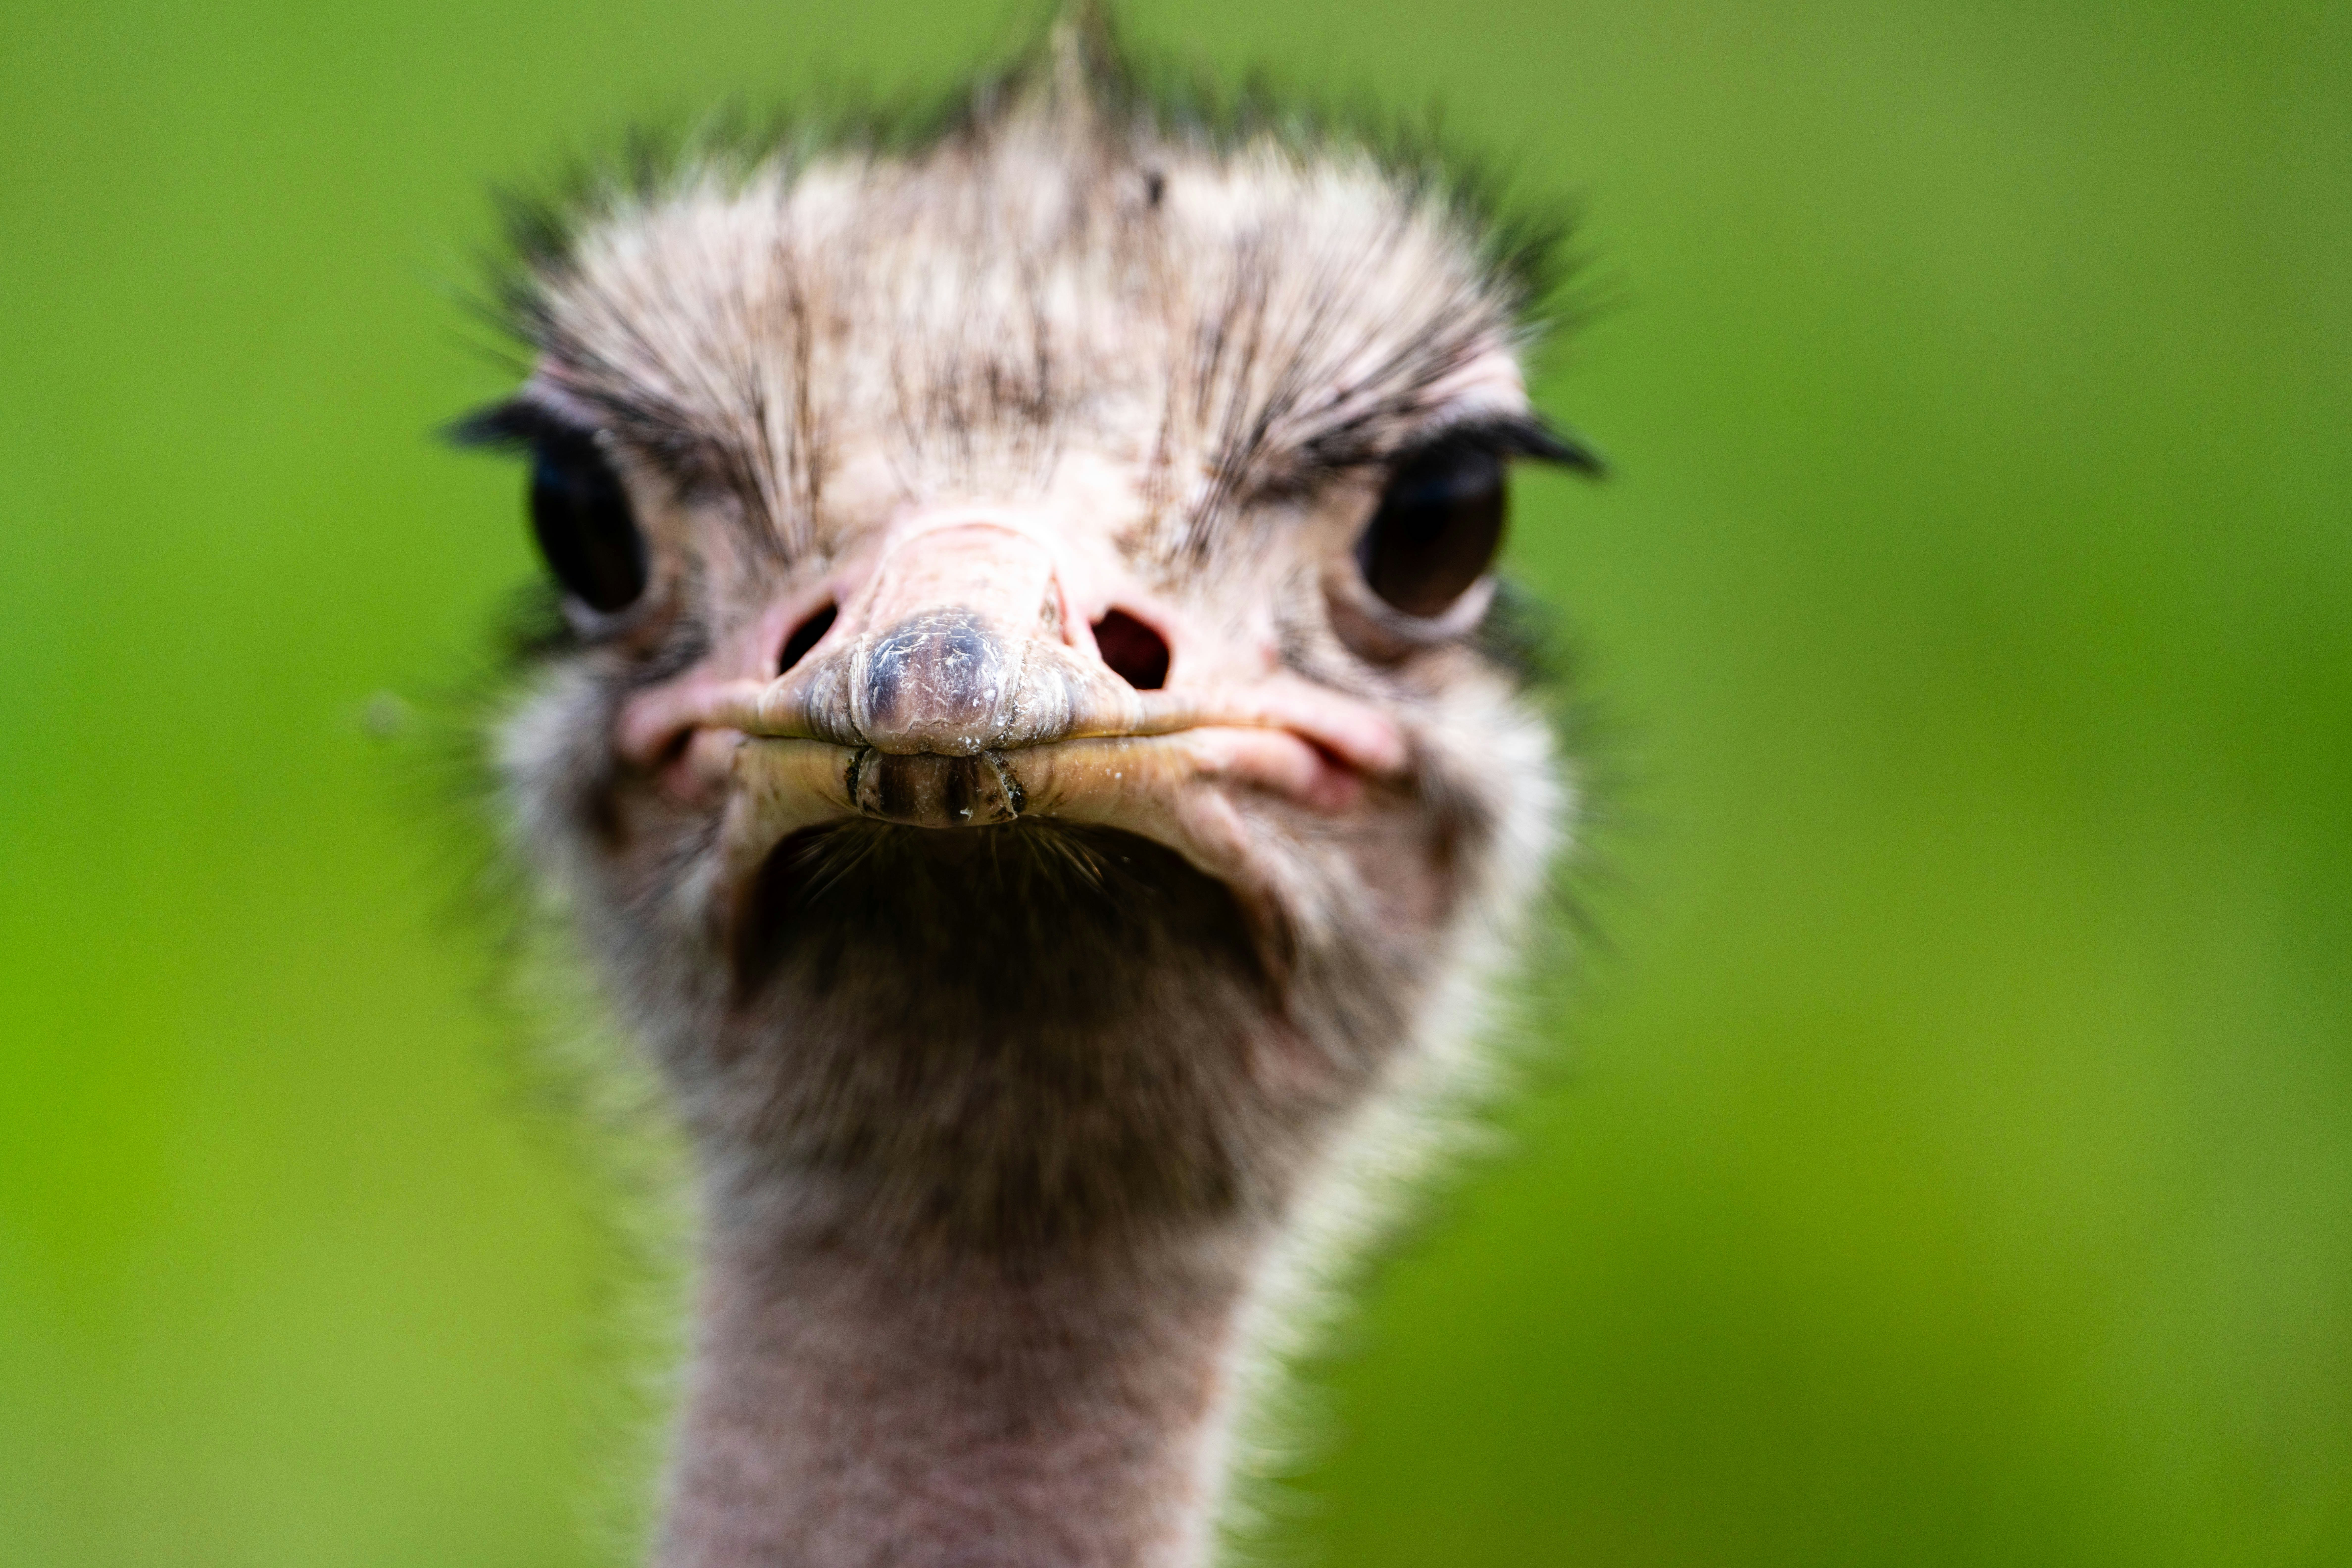 great photo recipe,how to photograph ostrich is the boss.